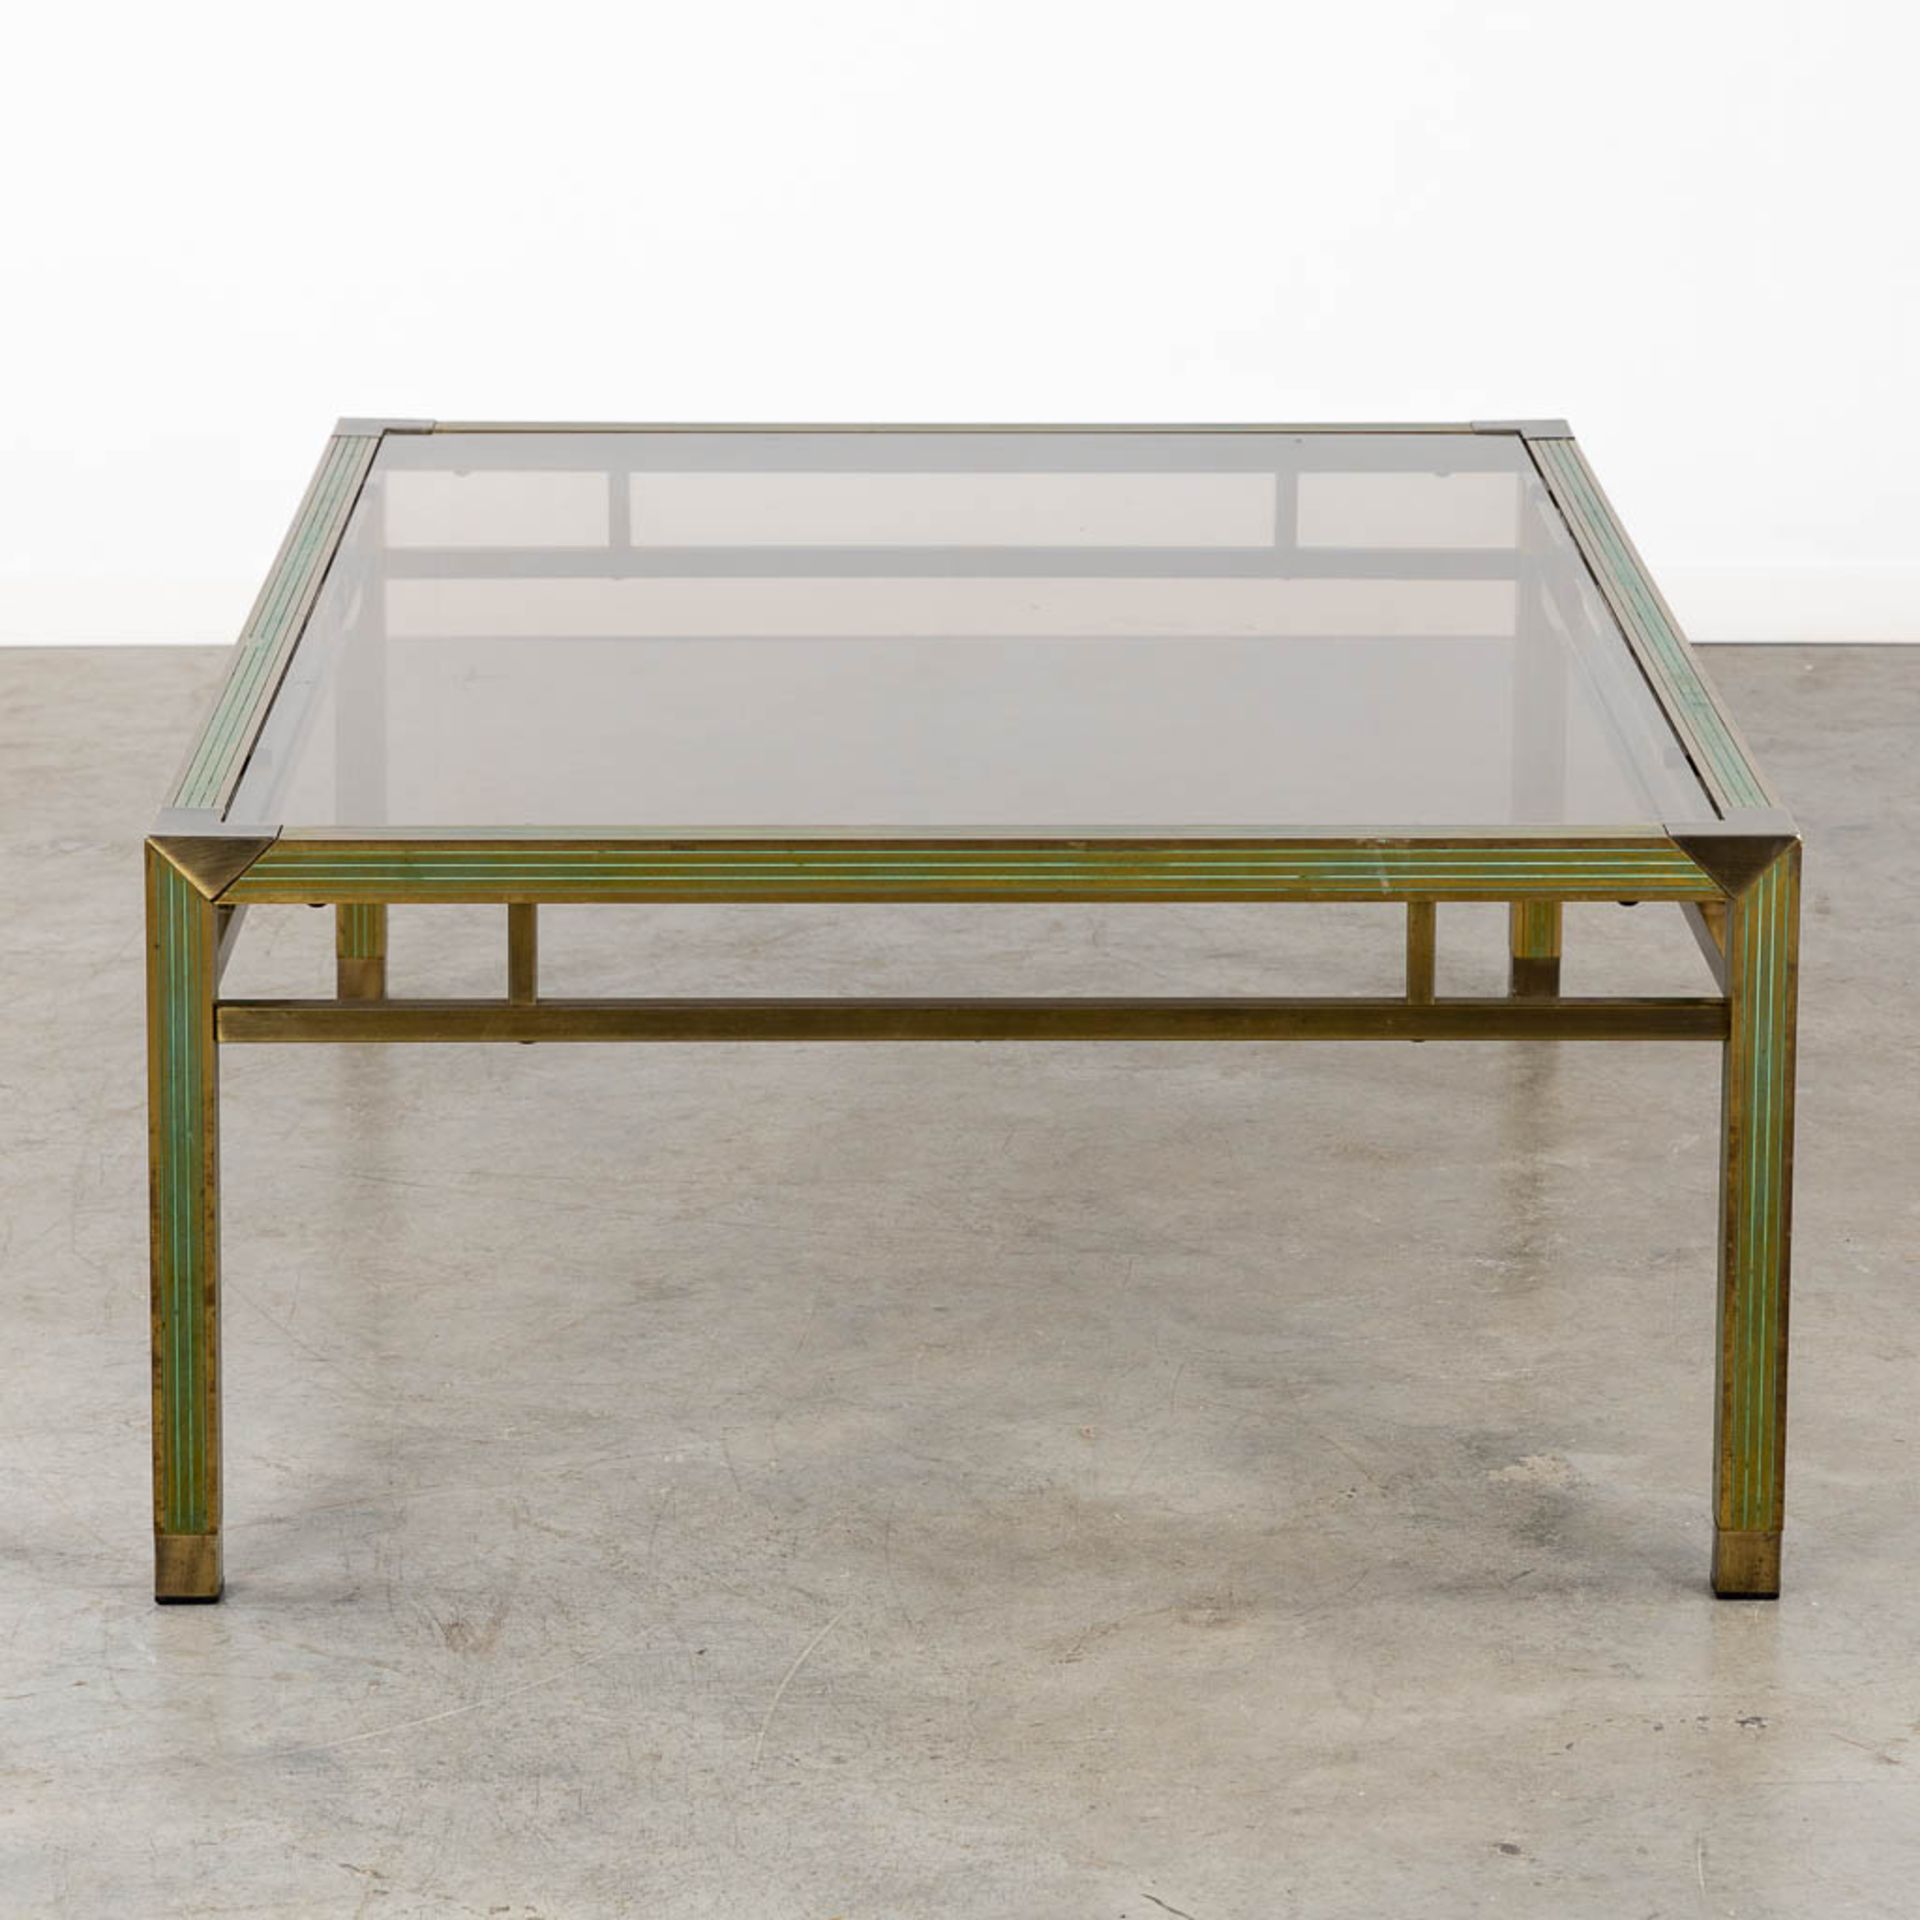 A mid-century coffee table, brass and glass in the style of Belgo Chrome. (L:88 x W:128 x H:43 cm) - Bild 4 aus 9